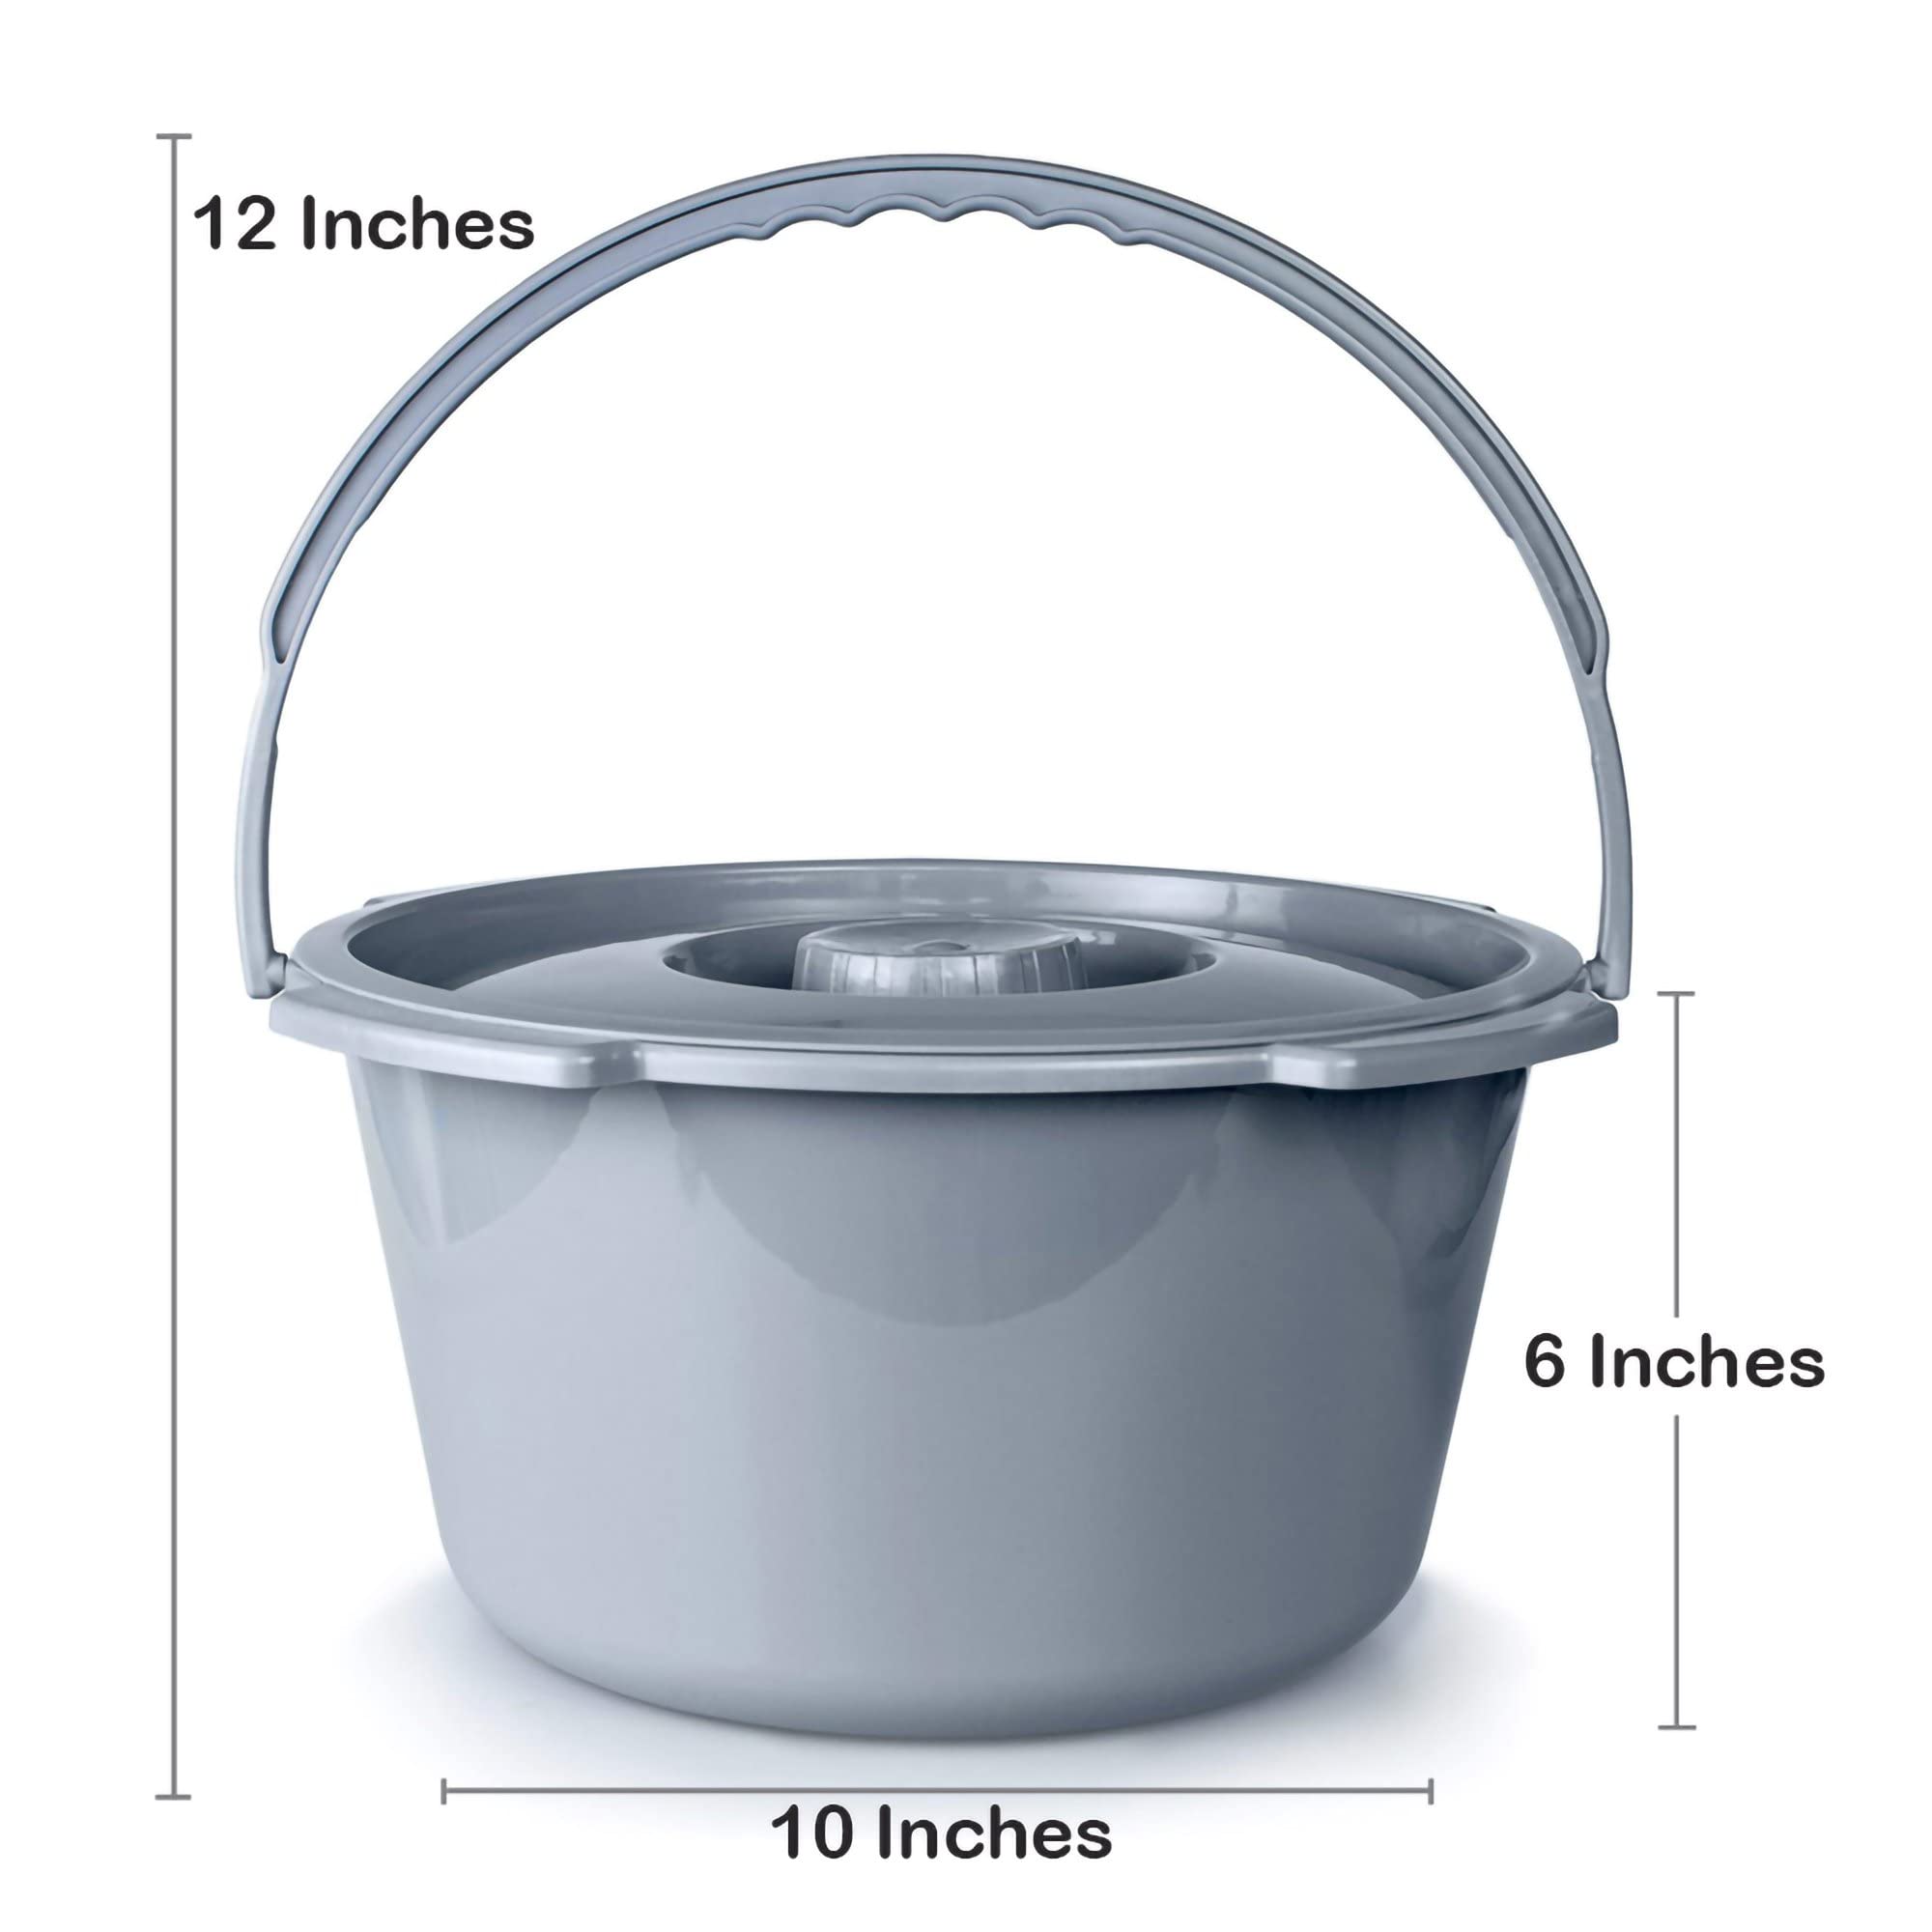 McKesson Commode Replacement Bucket with Handle and Lid, 7.5 qt, 1 Count